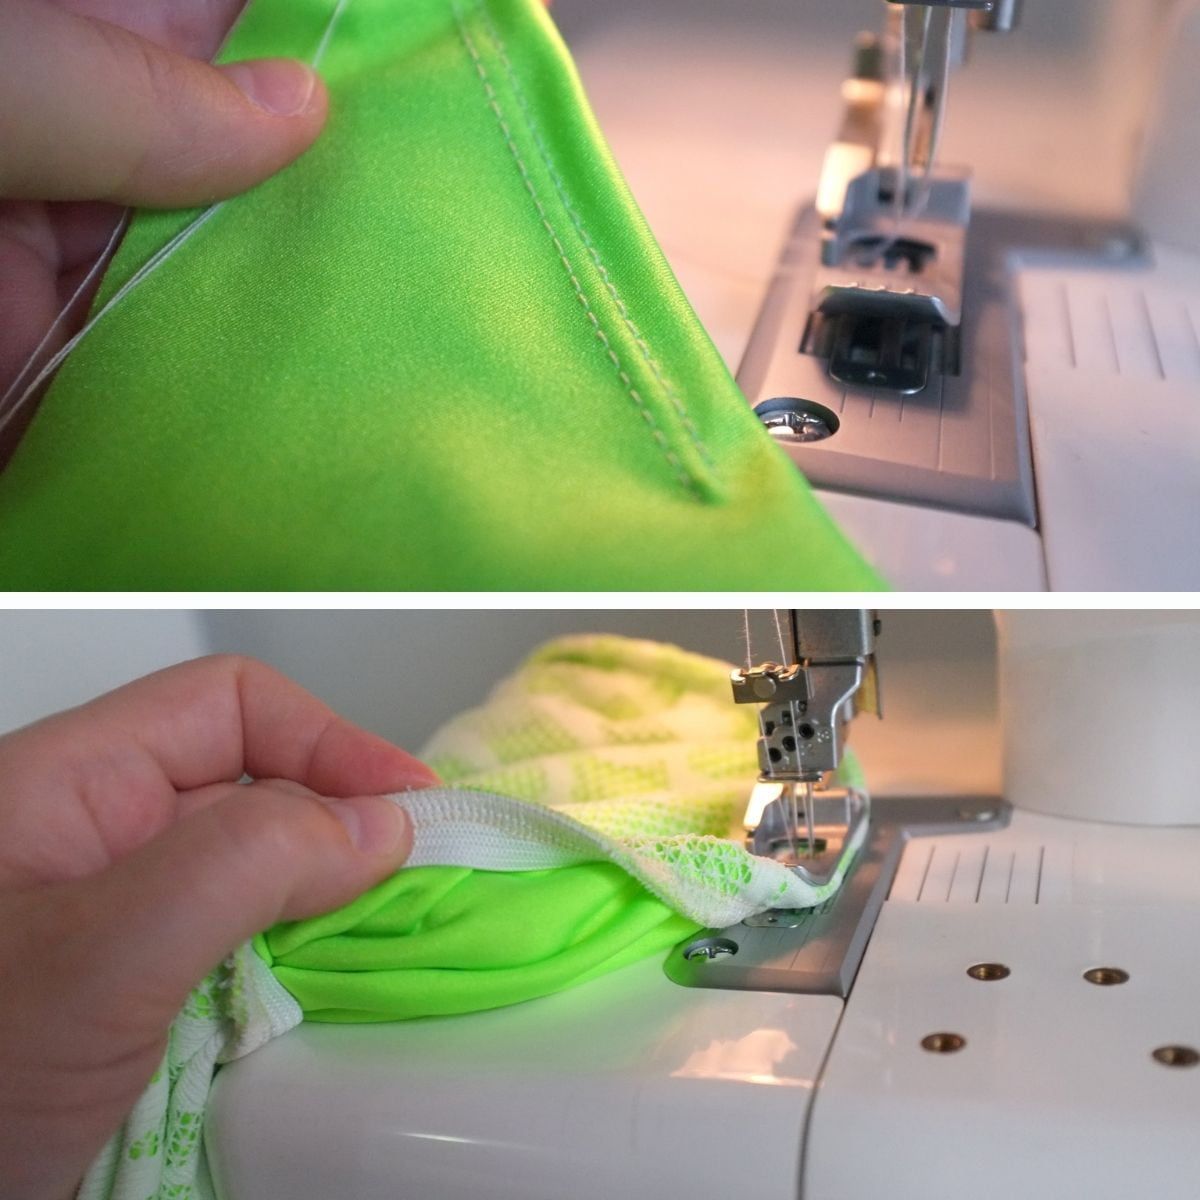 Sew with Your Serger (It's Not Just for Finishing!) - Sew Daily